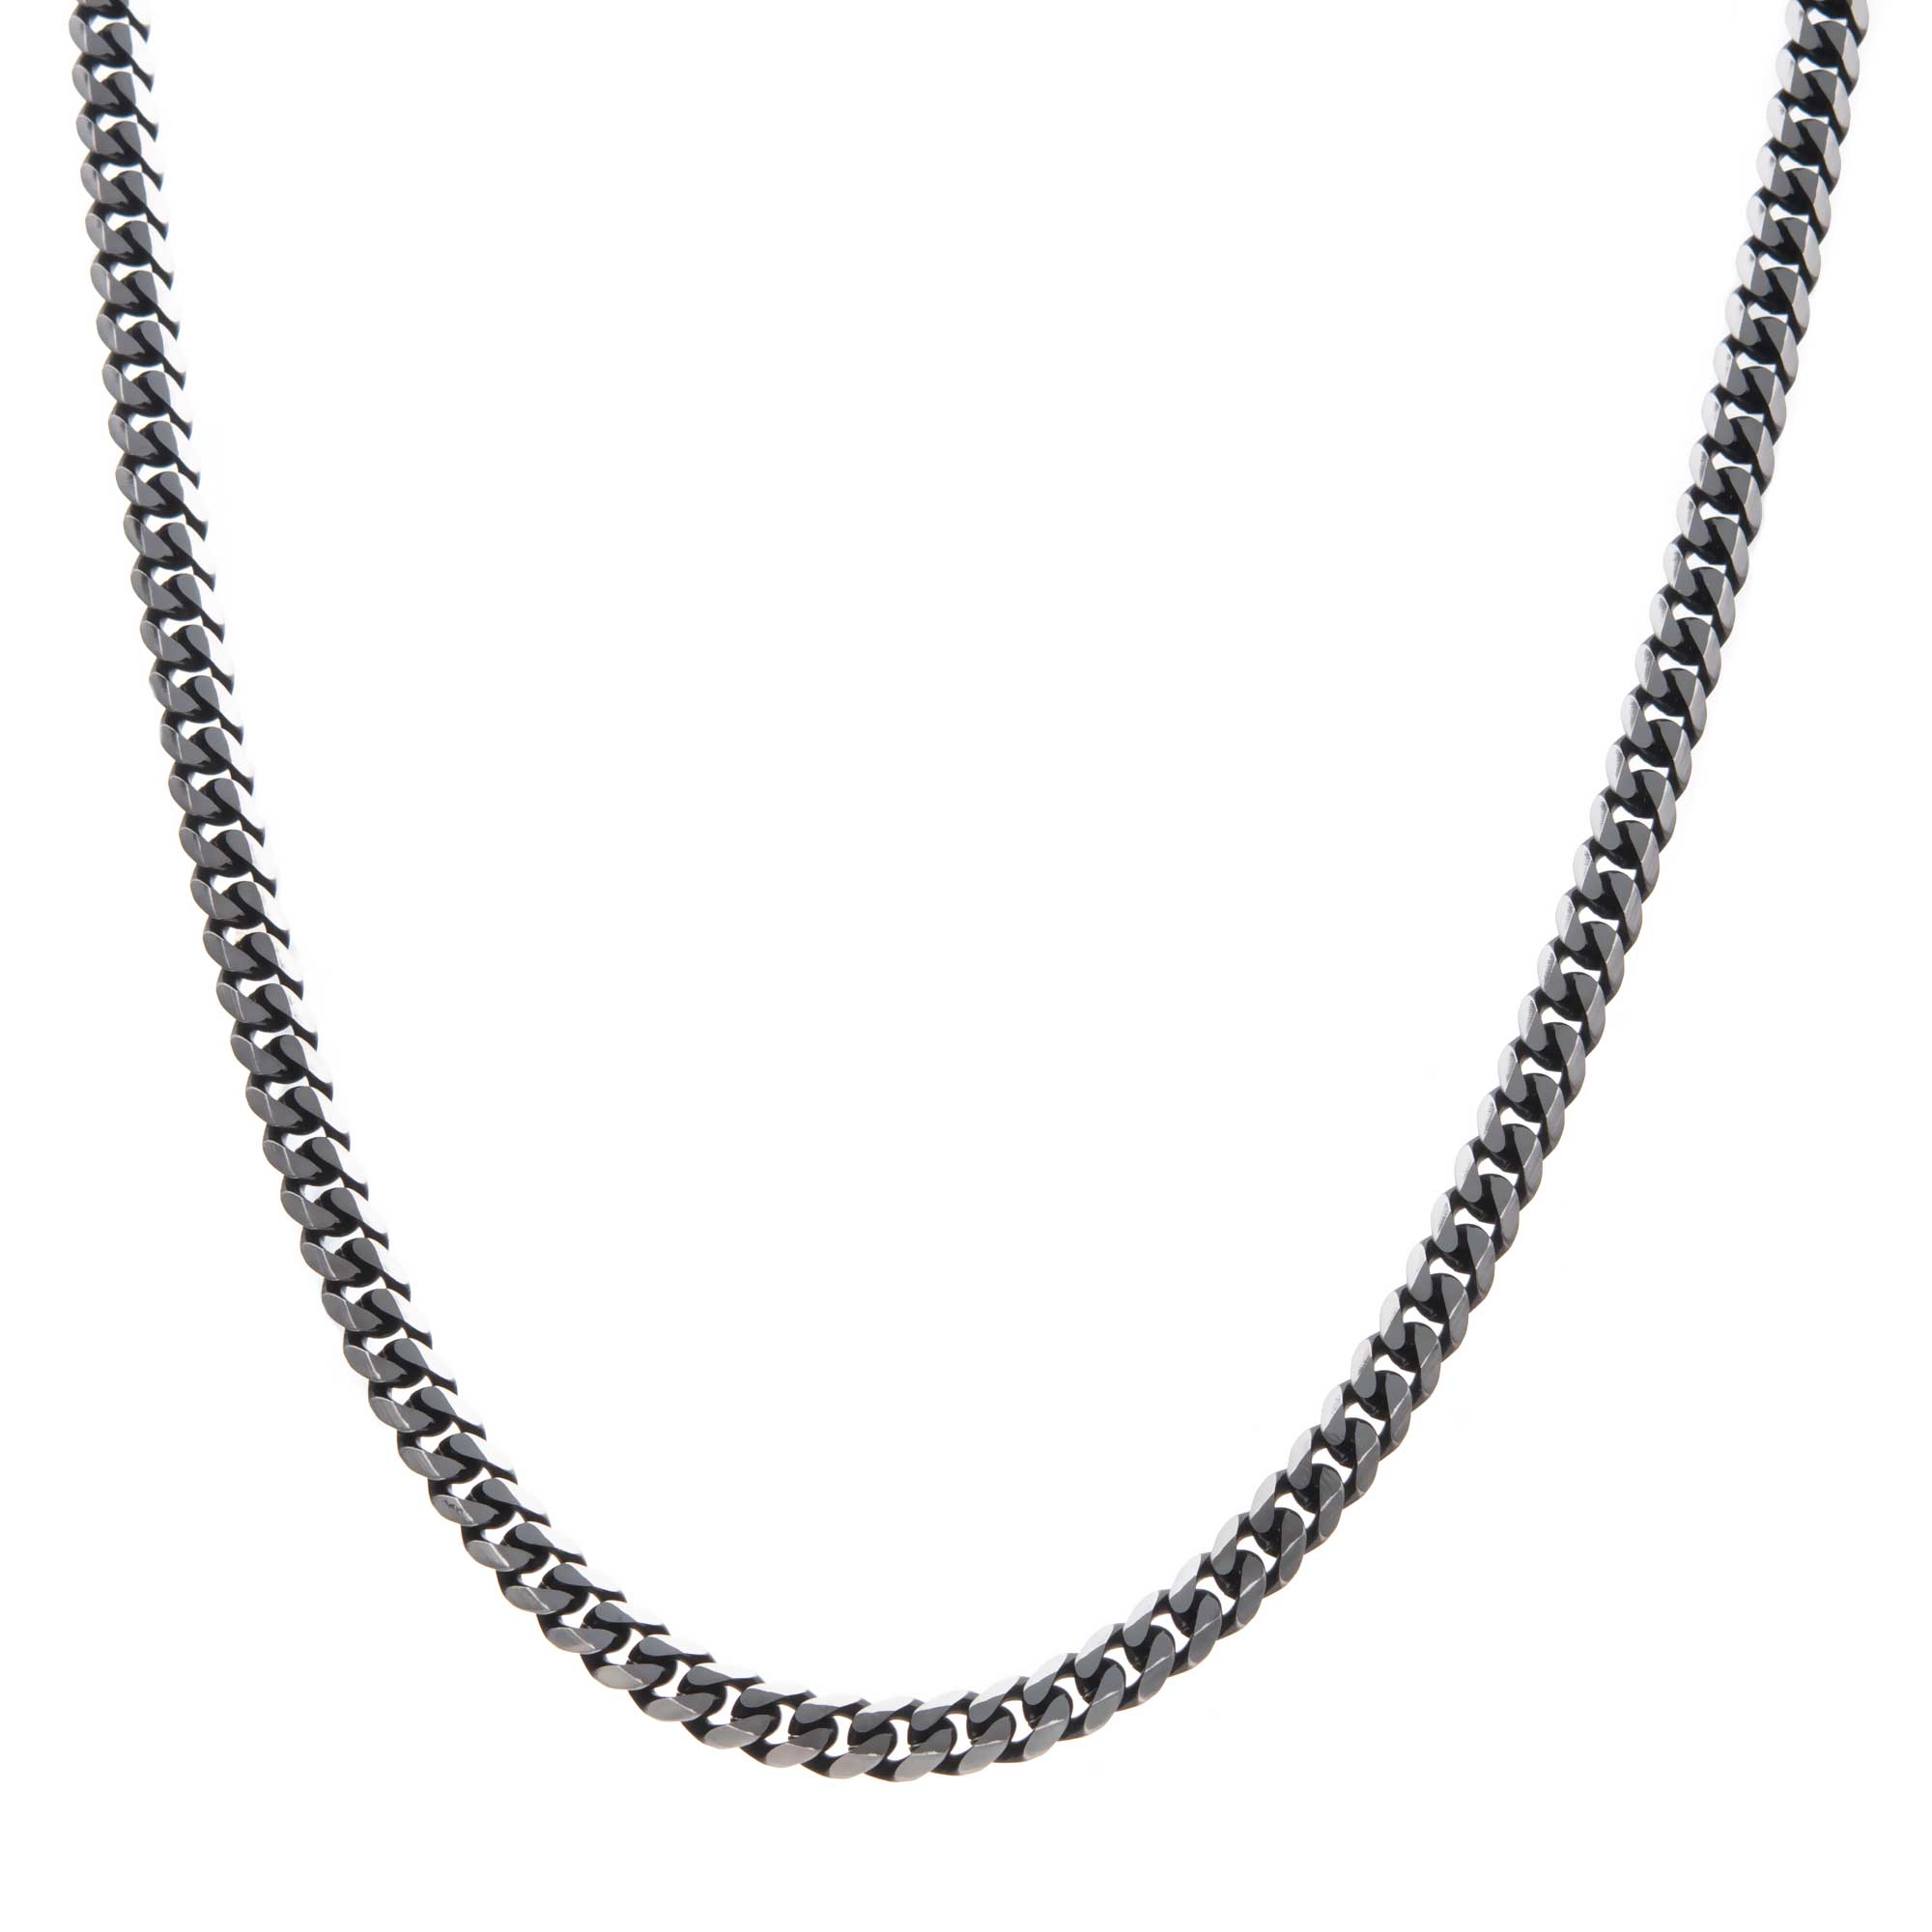 Stainless Steel Black Plated 8mm Diamond Curb Chain Image 2 Mitchell's Jewelry Norman, OK